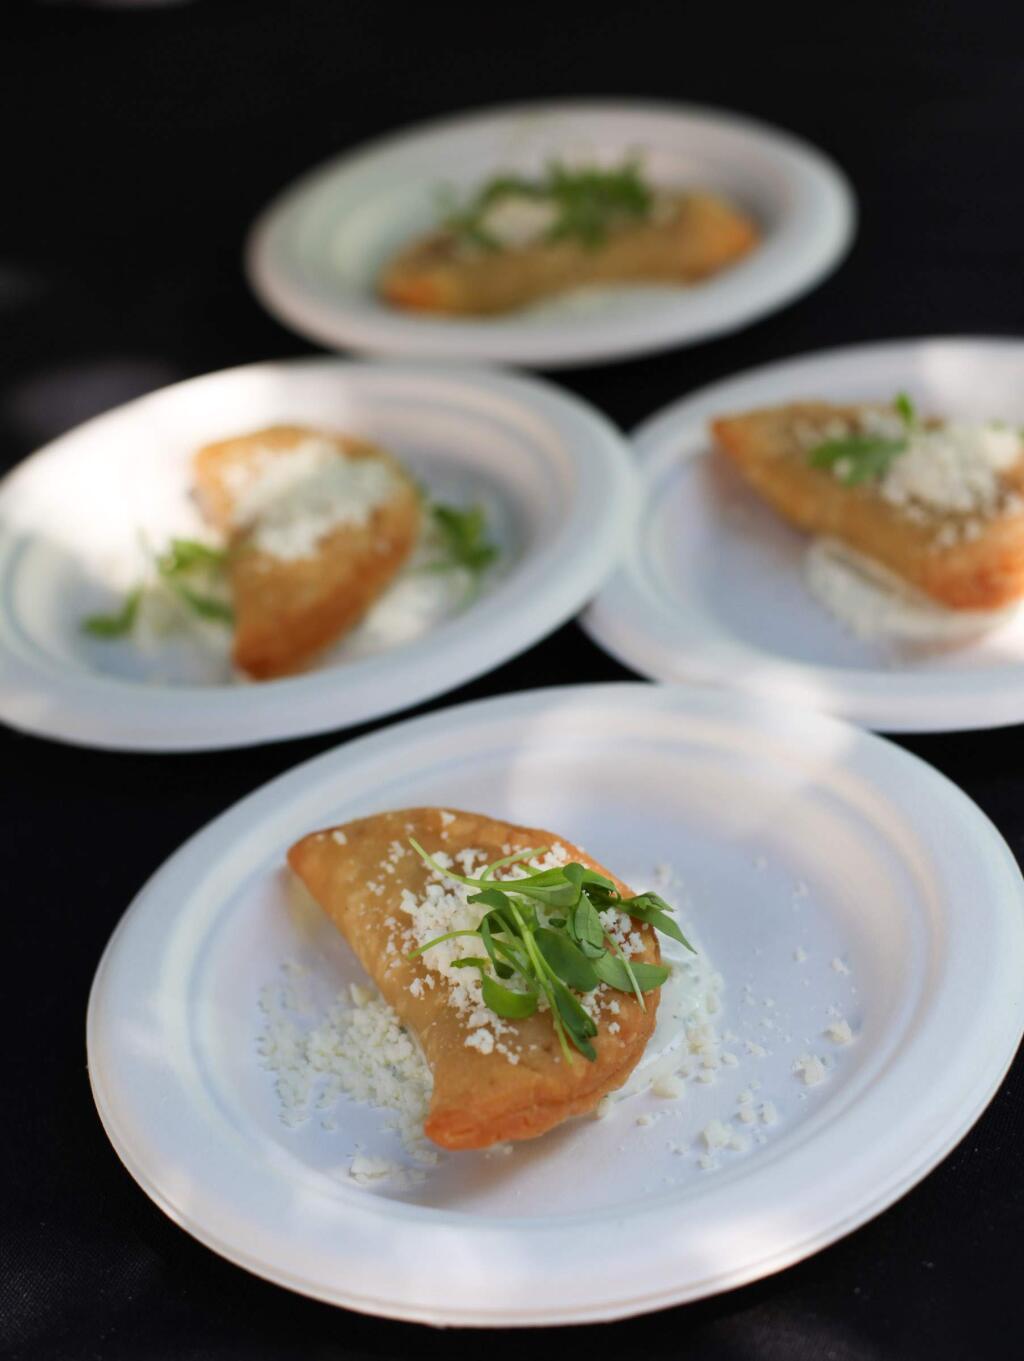 Speakeasy/Big Easy serves up 'Putnam Plaza' empanadas with Niman Ranch steak and potatoes topped with a lime cilantro crema, and crumbled queso fresco at A Taste of Petaluma benefiting Cinnabar Theater on Saturday August 23, 2014. (VICTORIA WEBB/FOR THE ARGUS-COURIER)